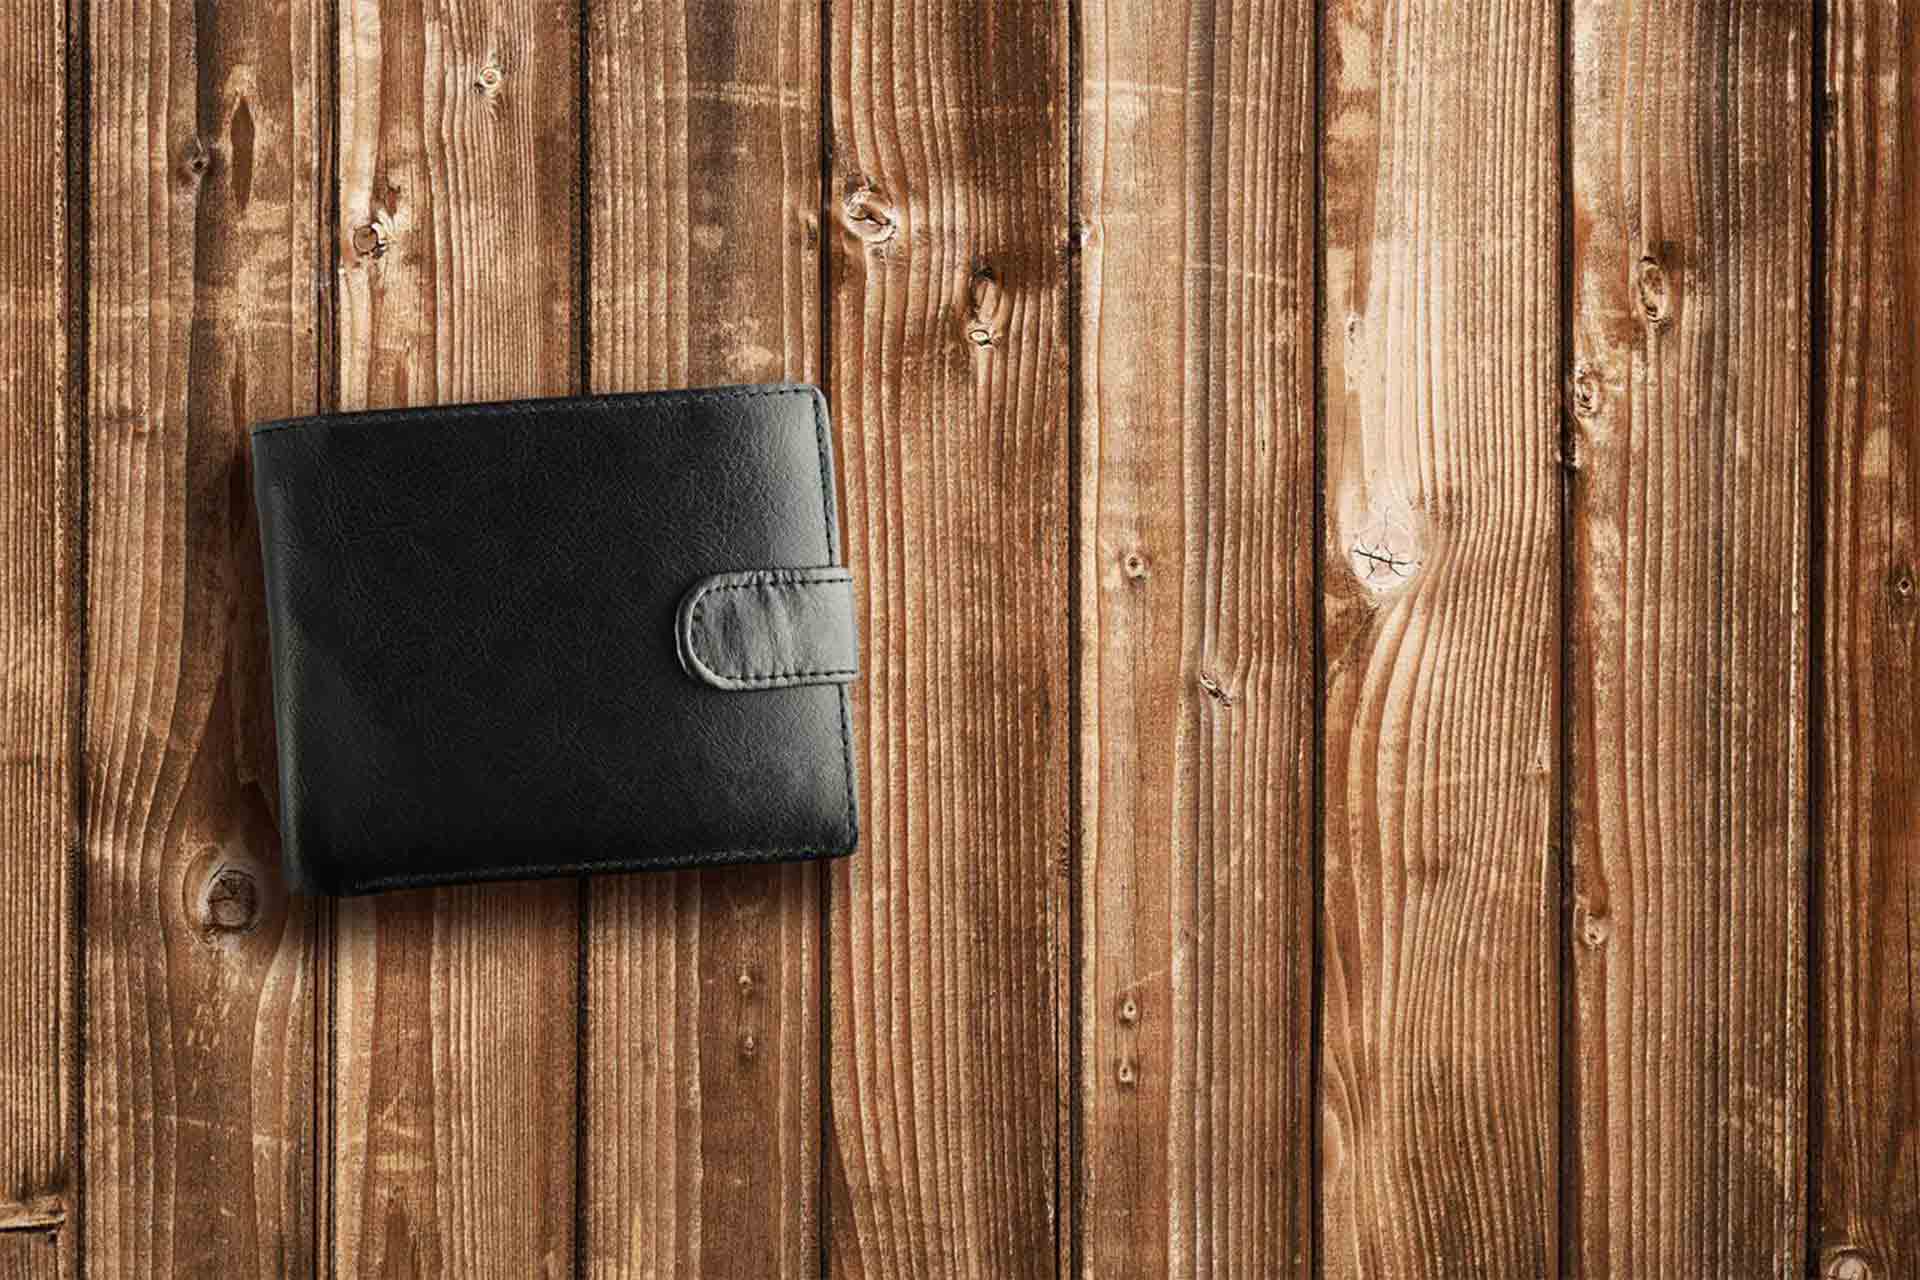 A leather wallet lies on a wooden table